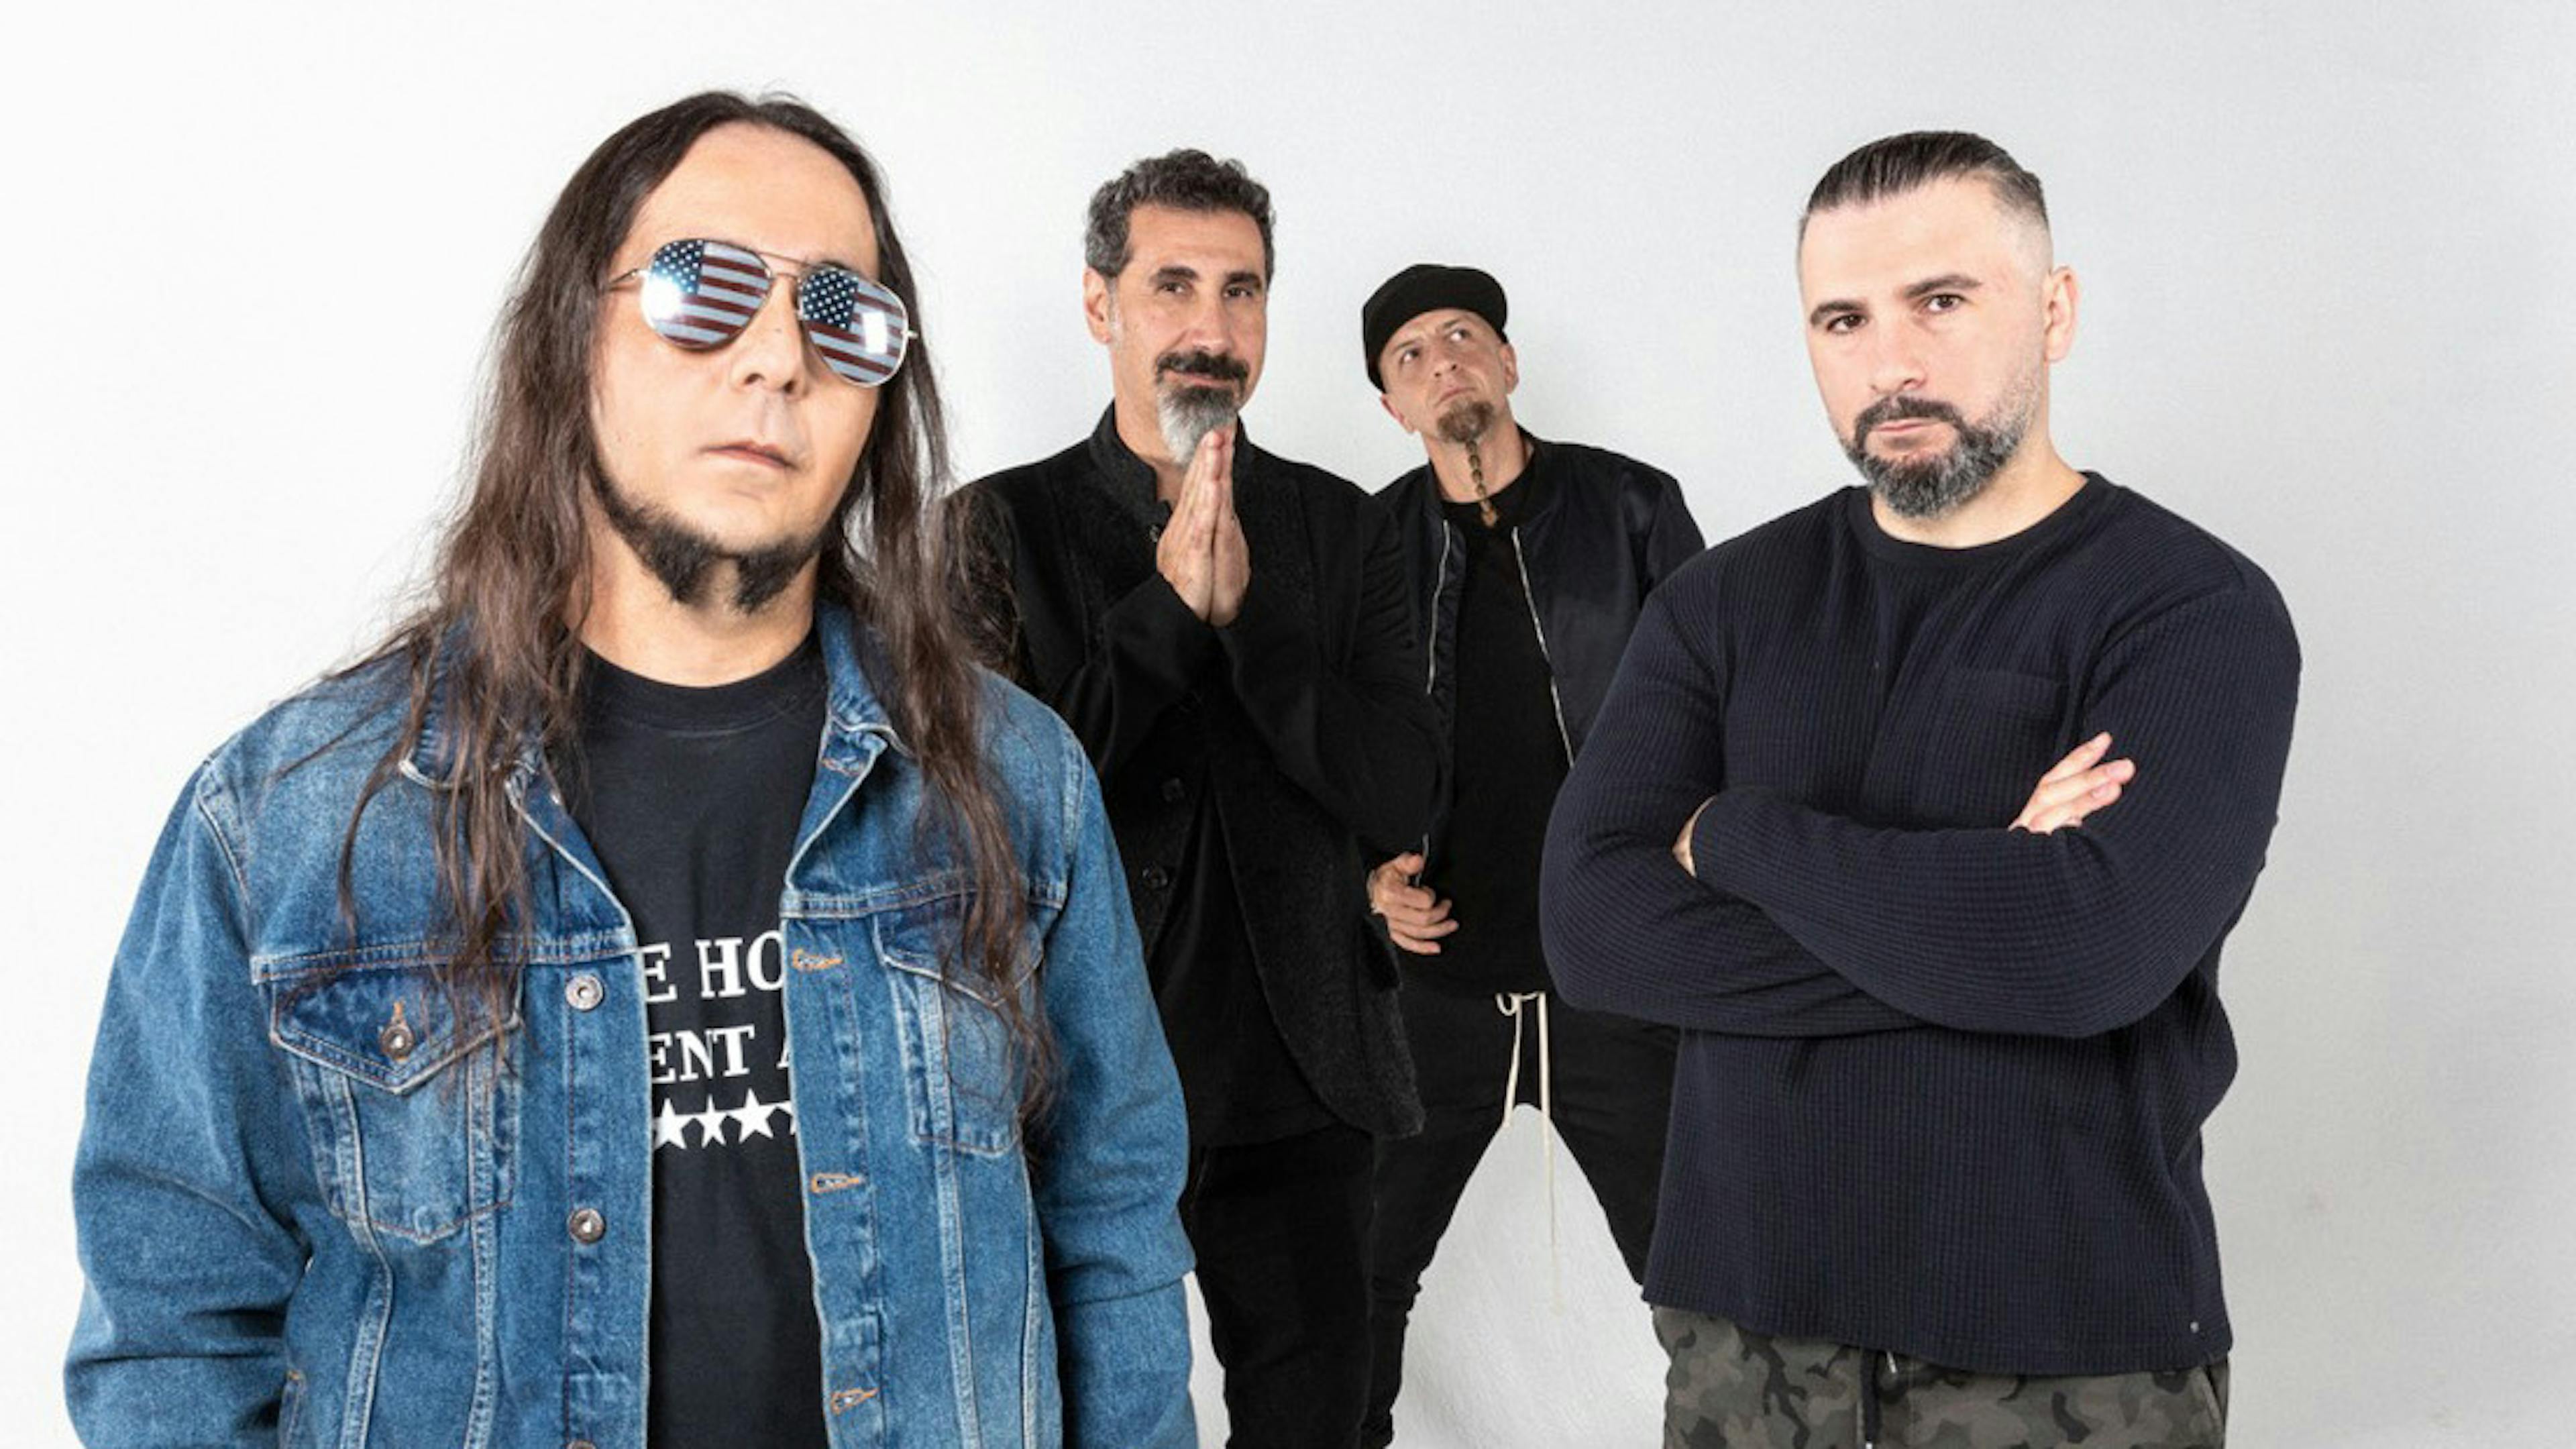 Daron Malakian On A New SOAD Album: "It's Not That Simple… I Wish It Was"